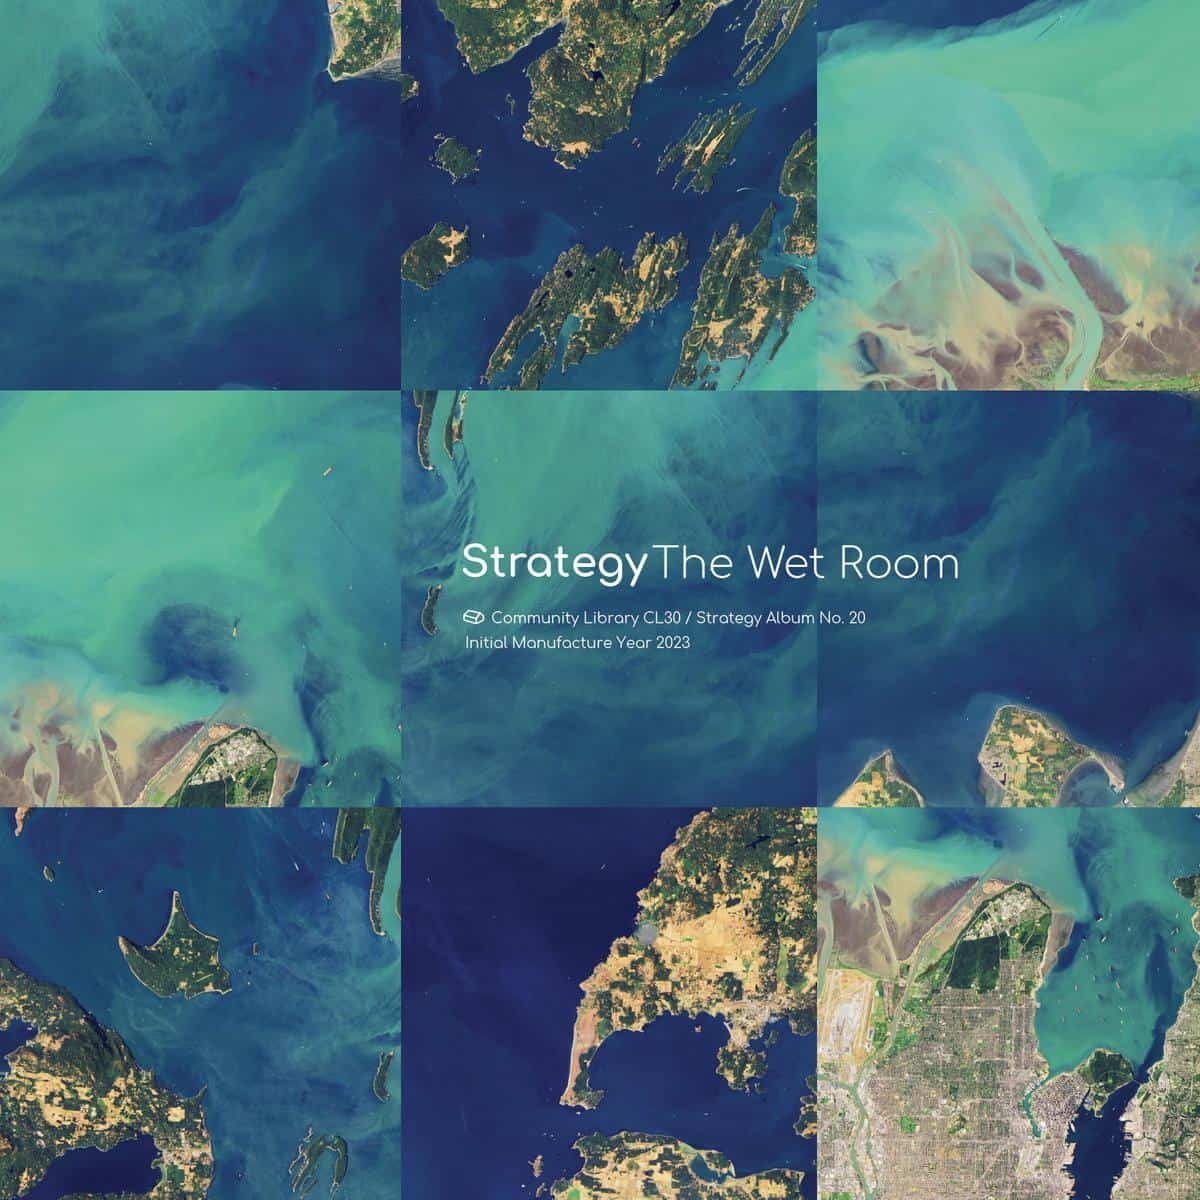 PRE-ORDER: 'The Wet Room' by Strategy Gloopy, liquid, dubwise electronica/ambient transmissions from beyond the ionosphere from Paul Dickow - not to be confused with the ex-Man City player and Scotland international. @STRATEGY_PaulD @communitylib normanrecords.com/records/201876…